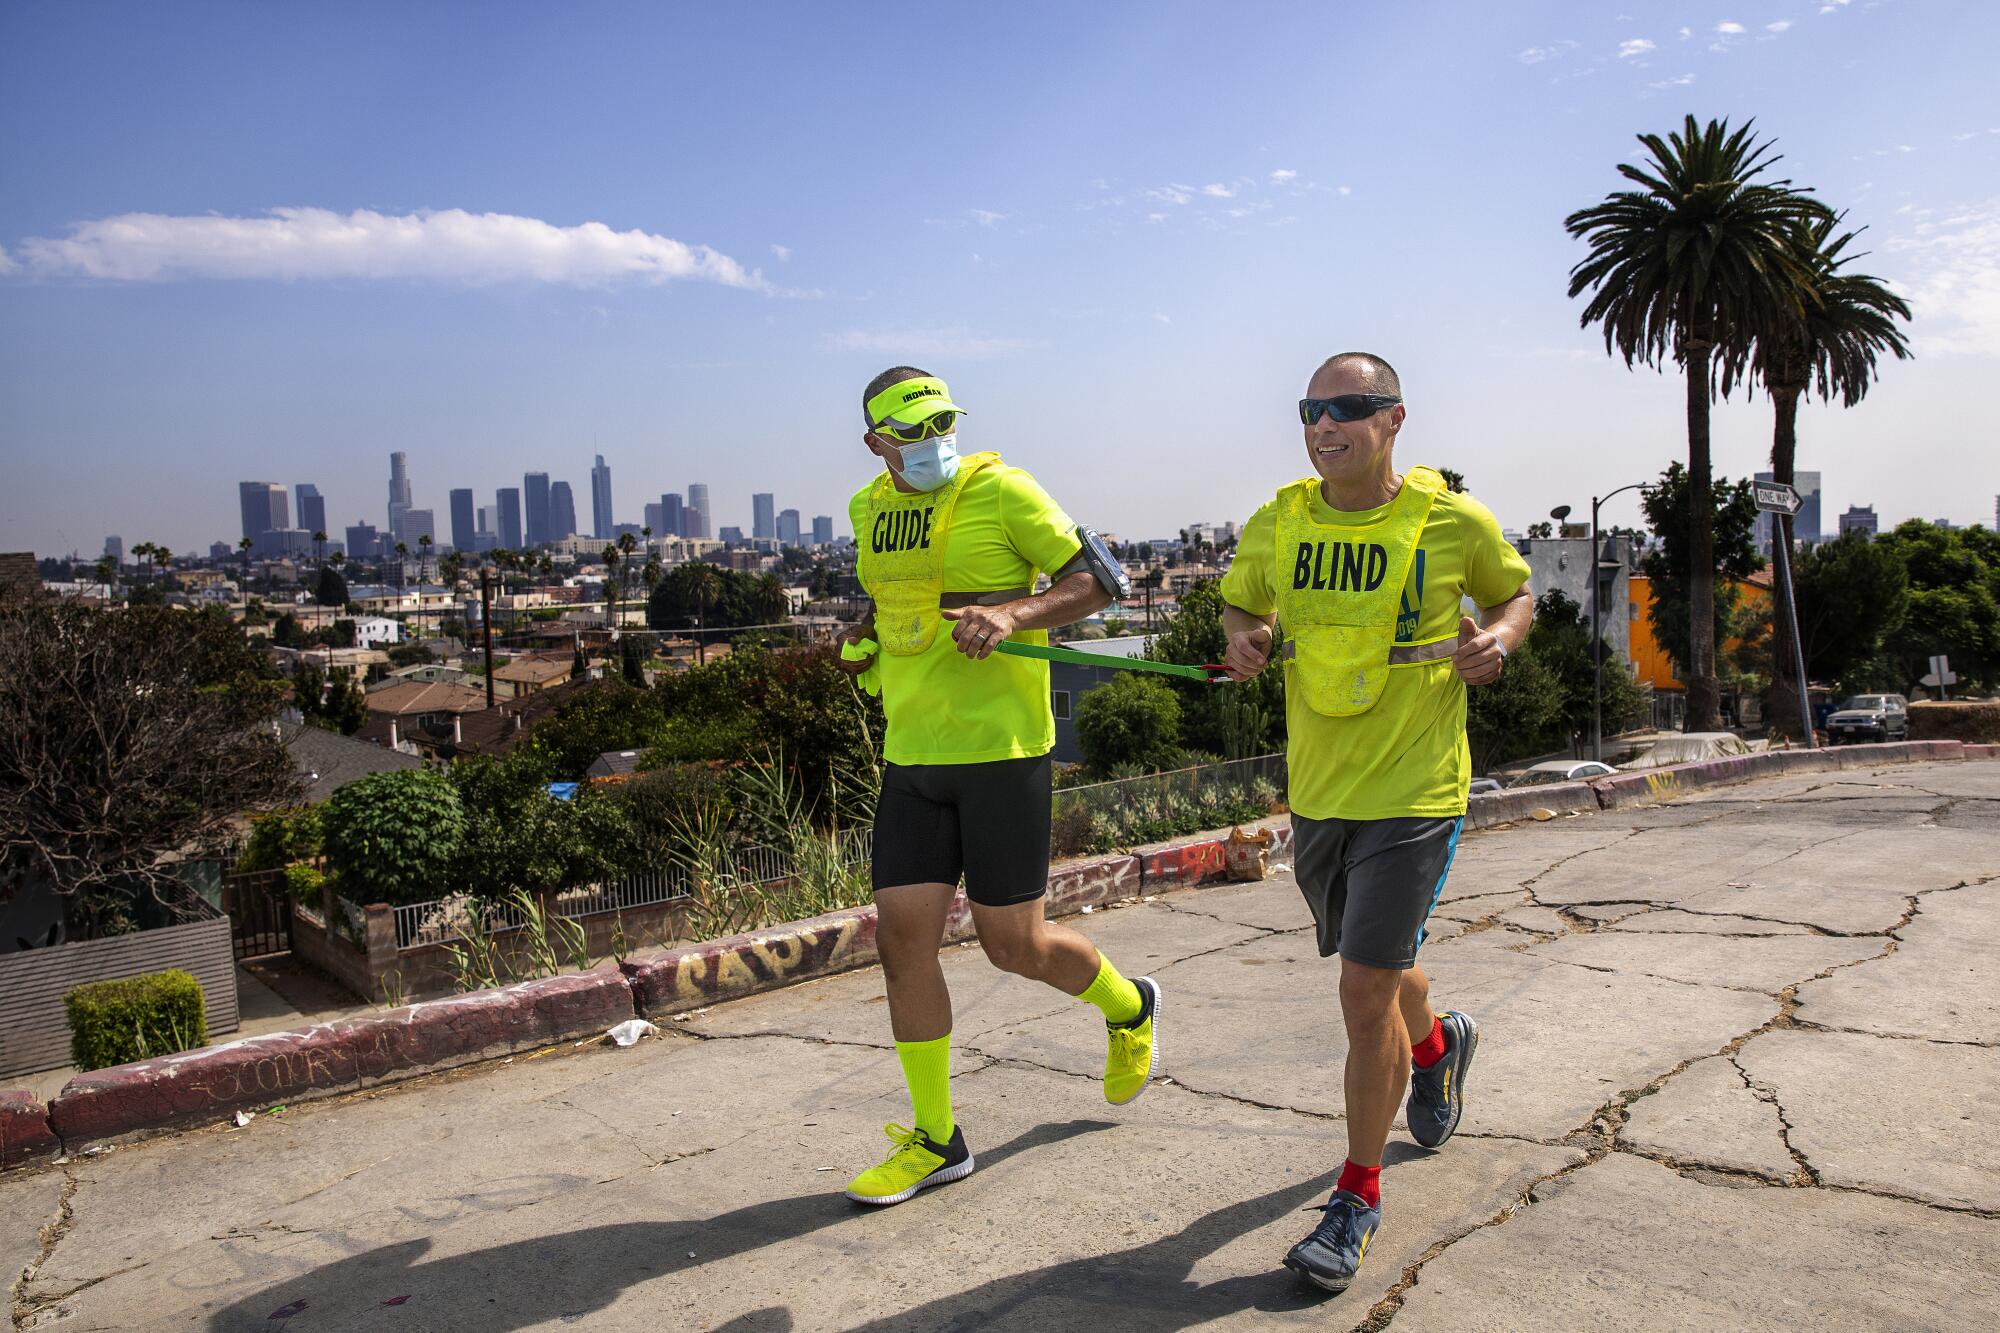 Tony Duenas, right, a marathon runner who is blind, and his guide, Ray Alcanter, jog together on Hoover Street in L.A.